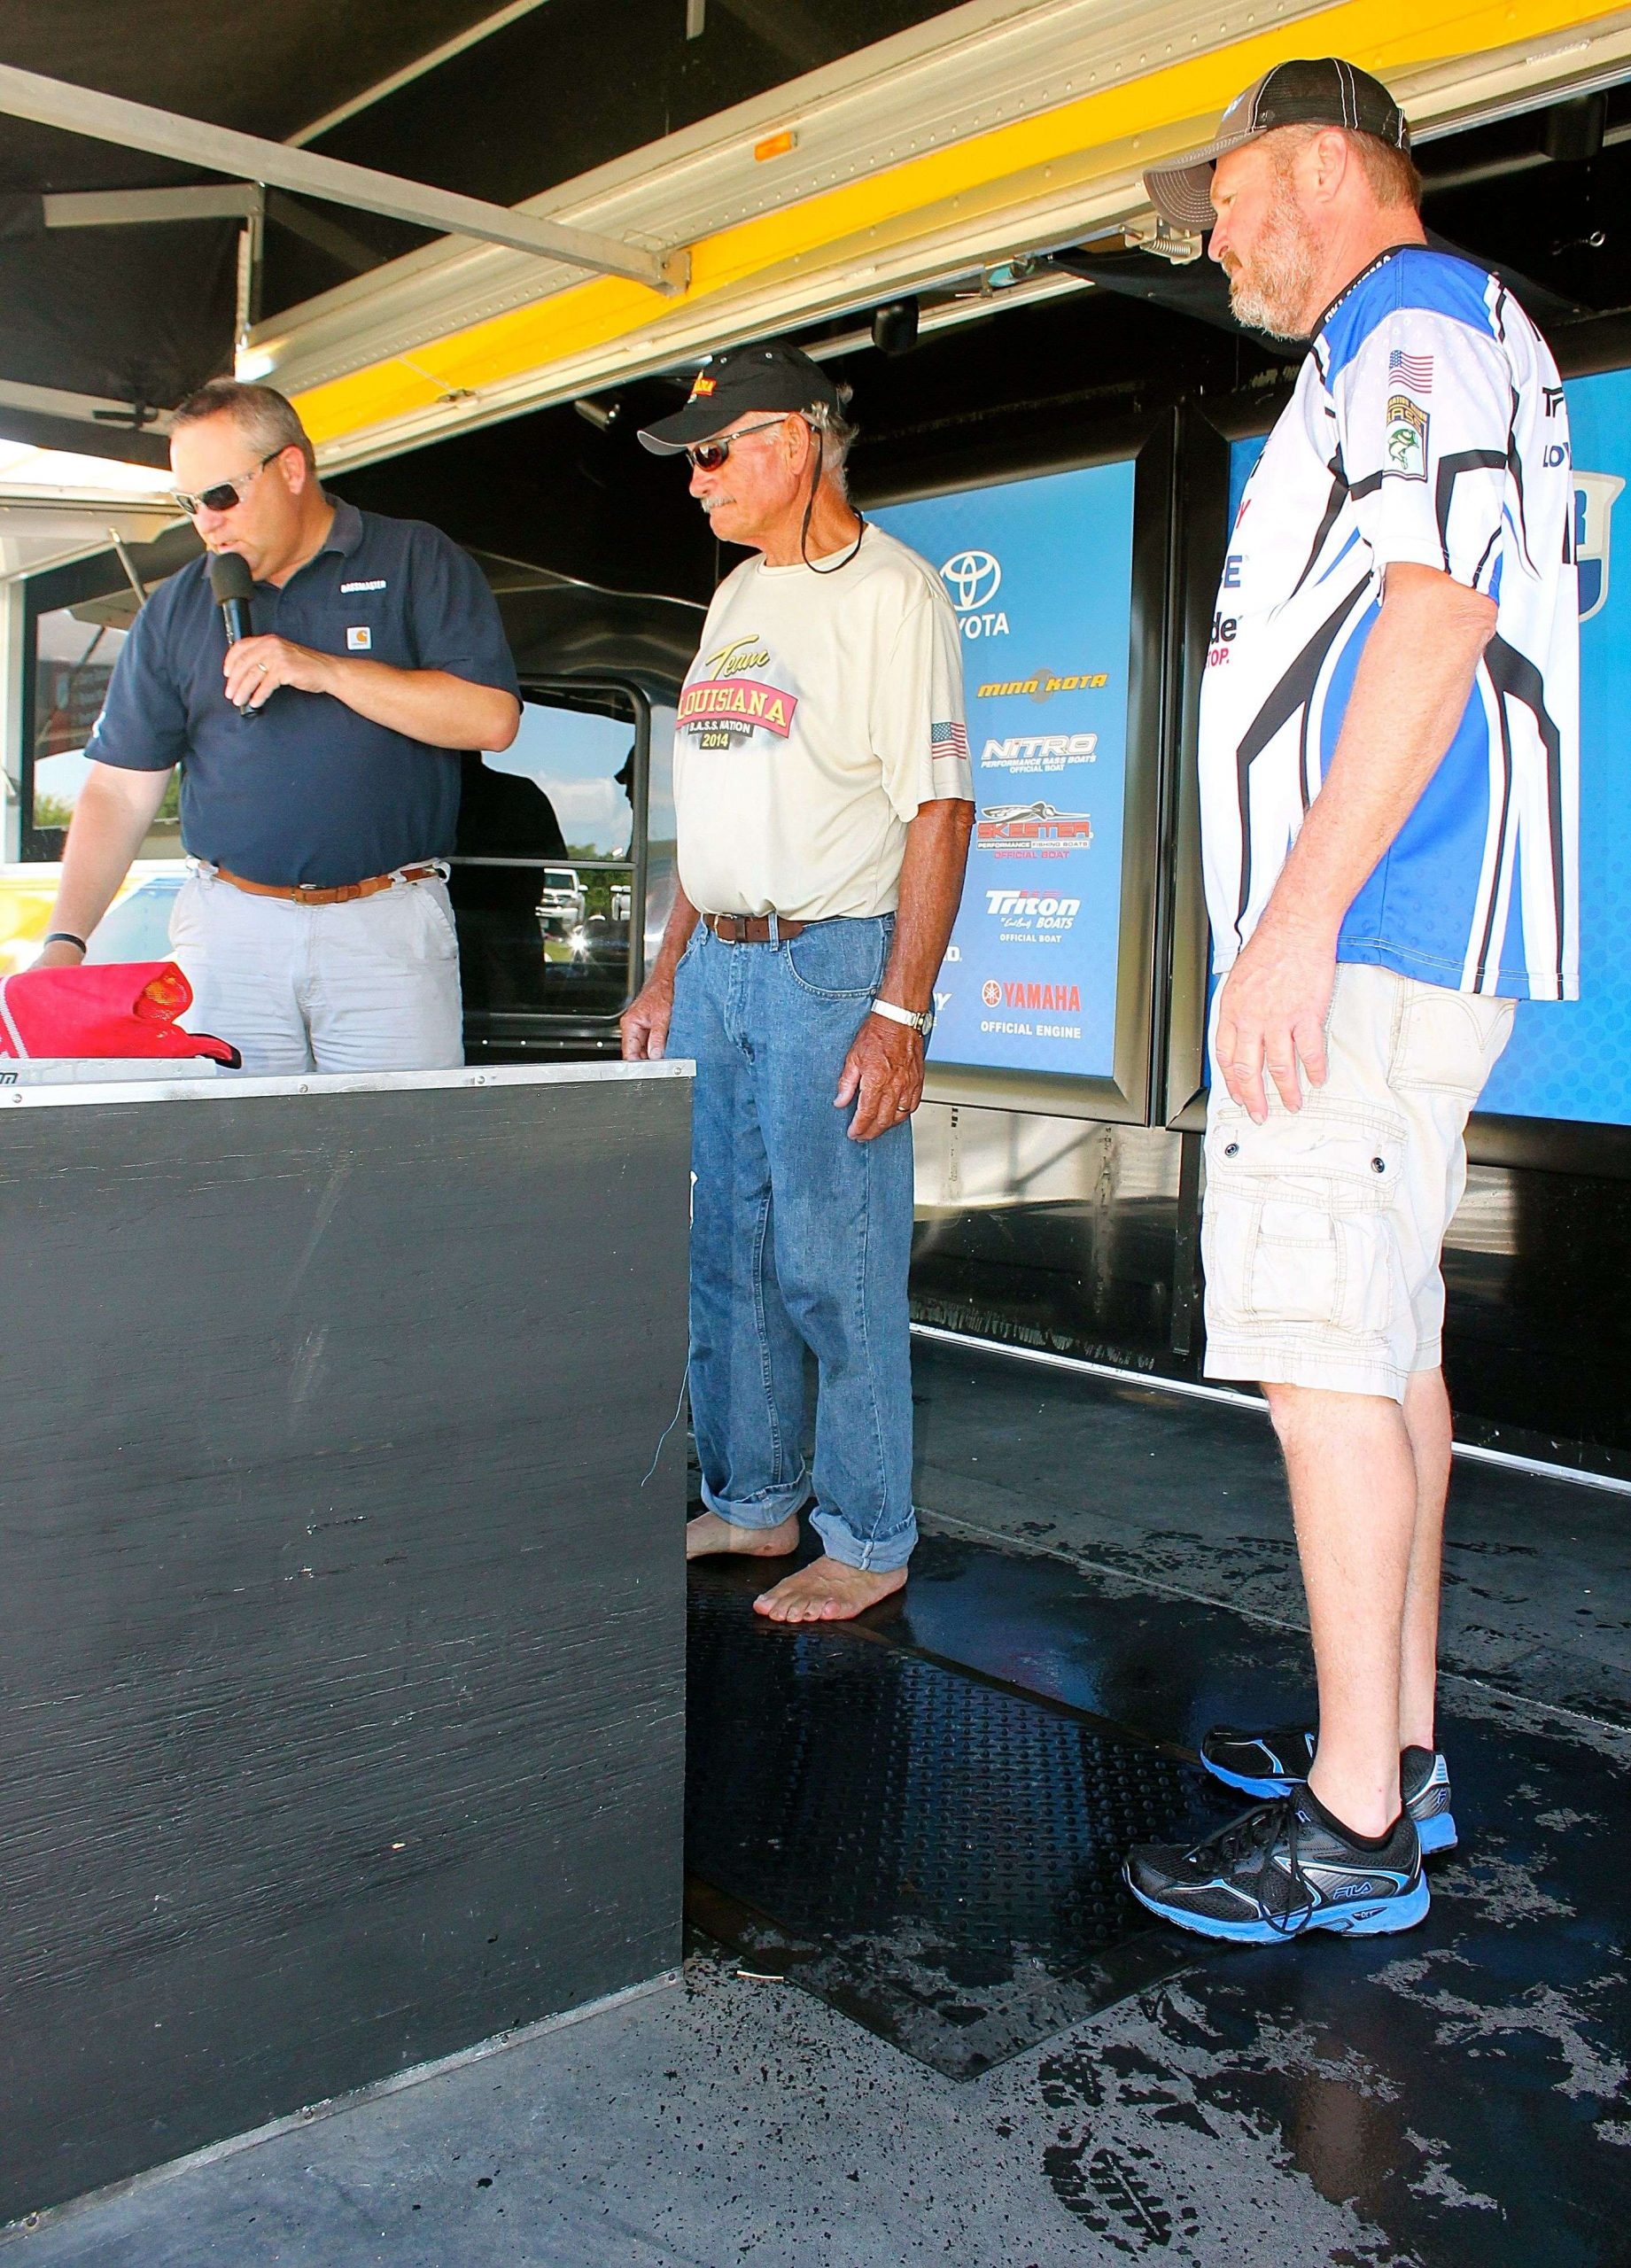 Louisiana angler Will Major sunned his toes as weighed in on Day 1.